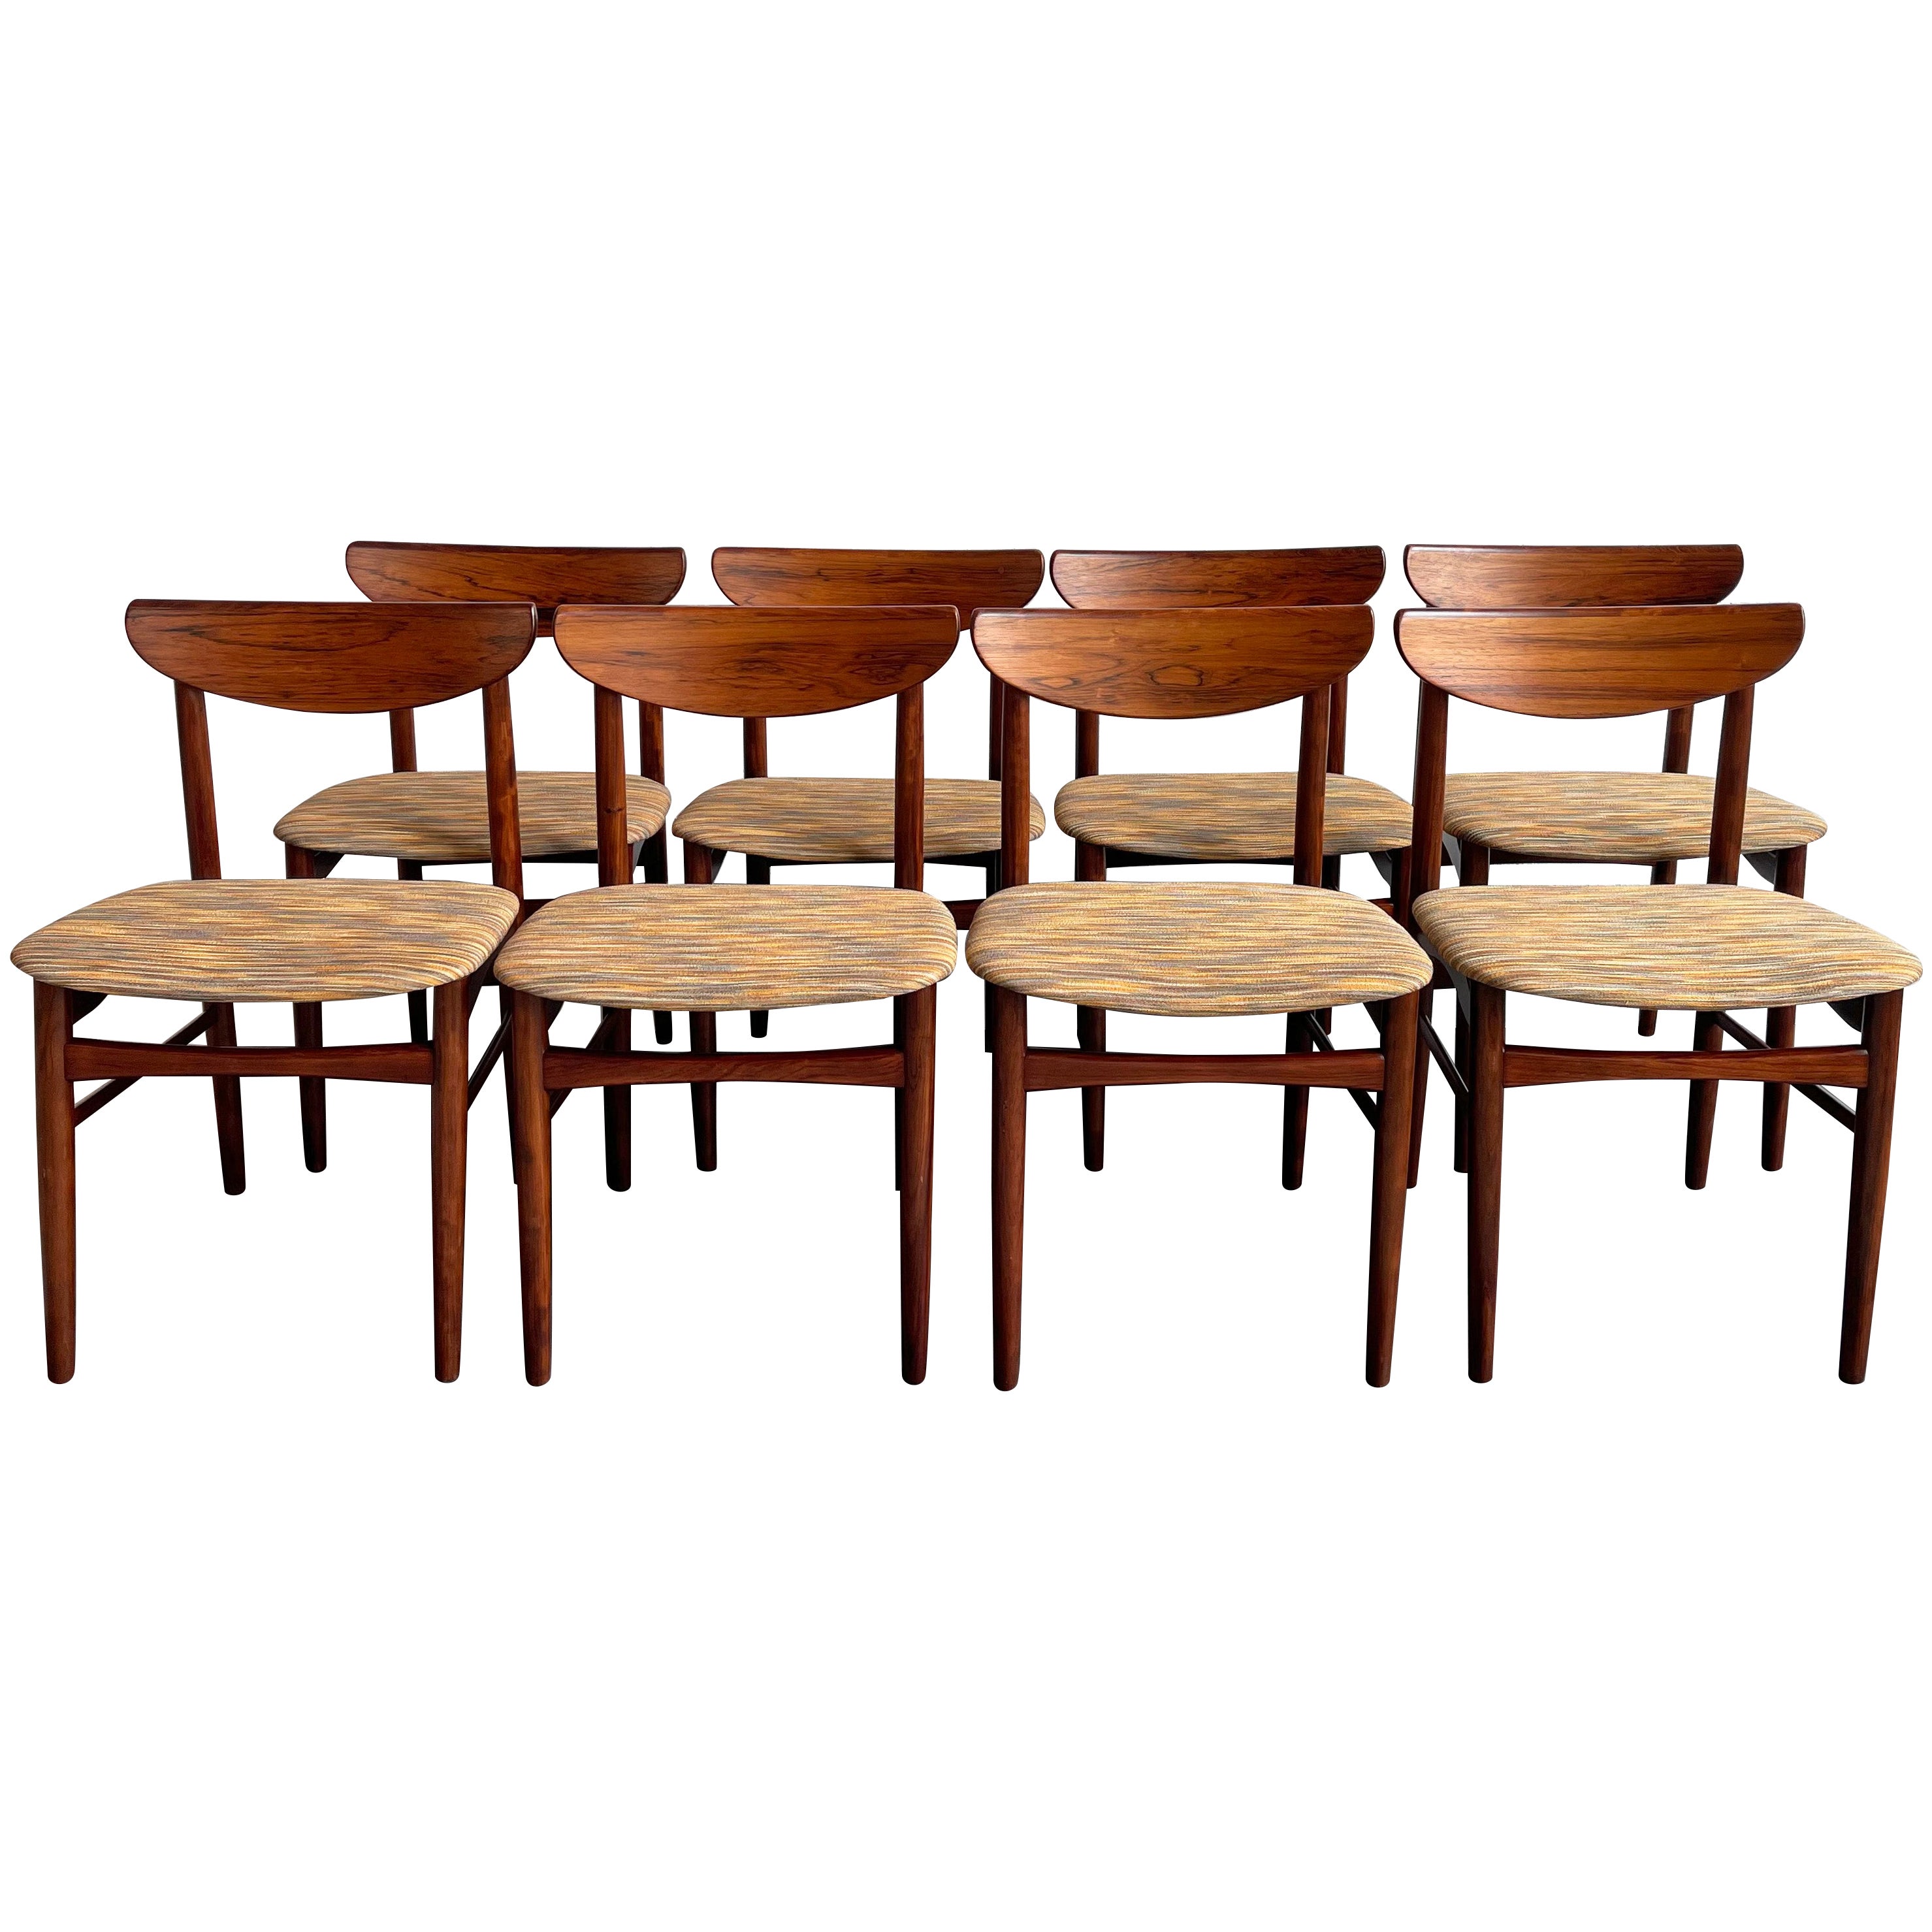 Danish Modern Rosewood Dining Chairs By Kurt Østervig For K.P. Møbler